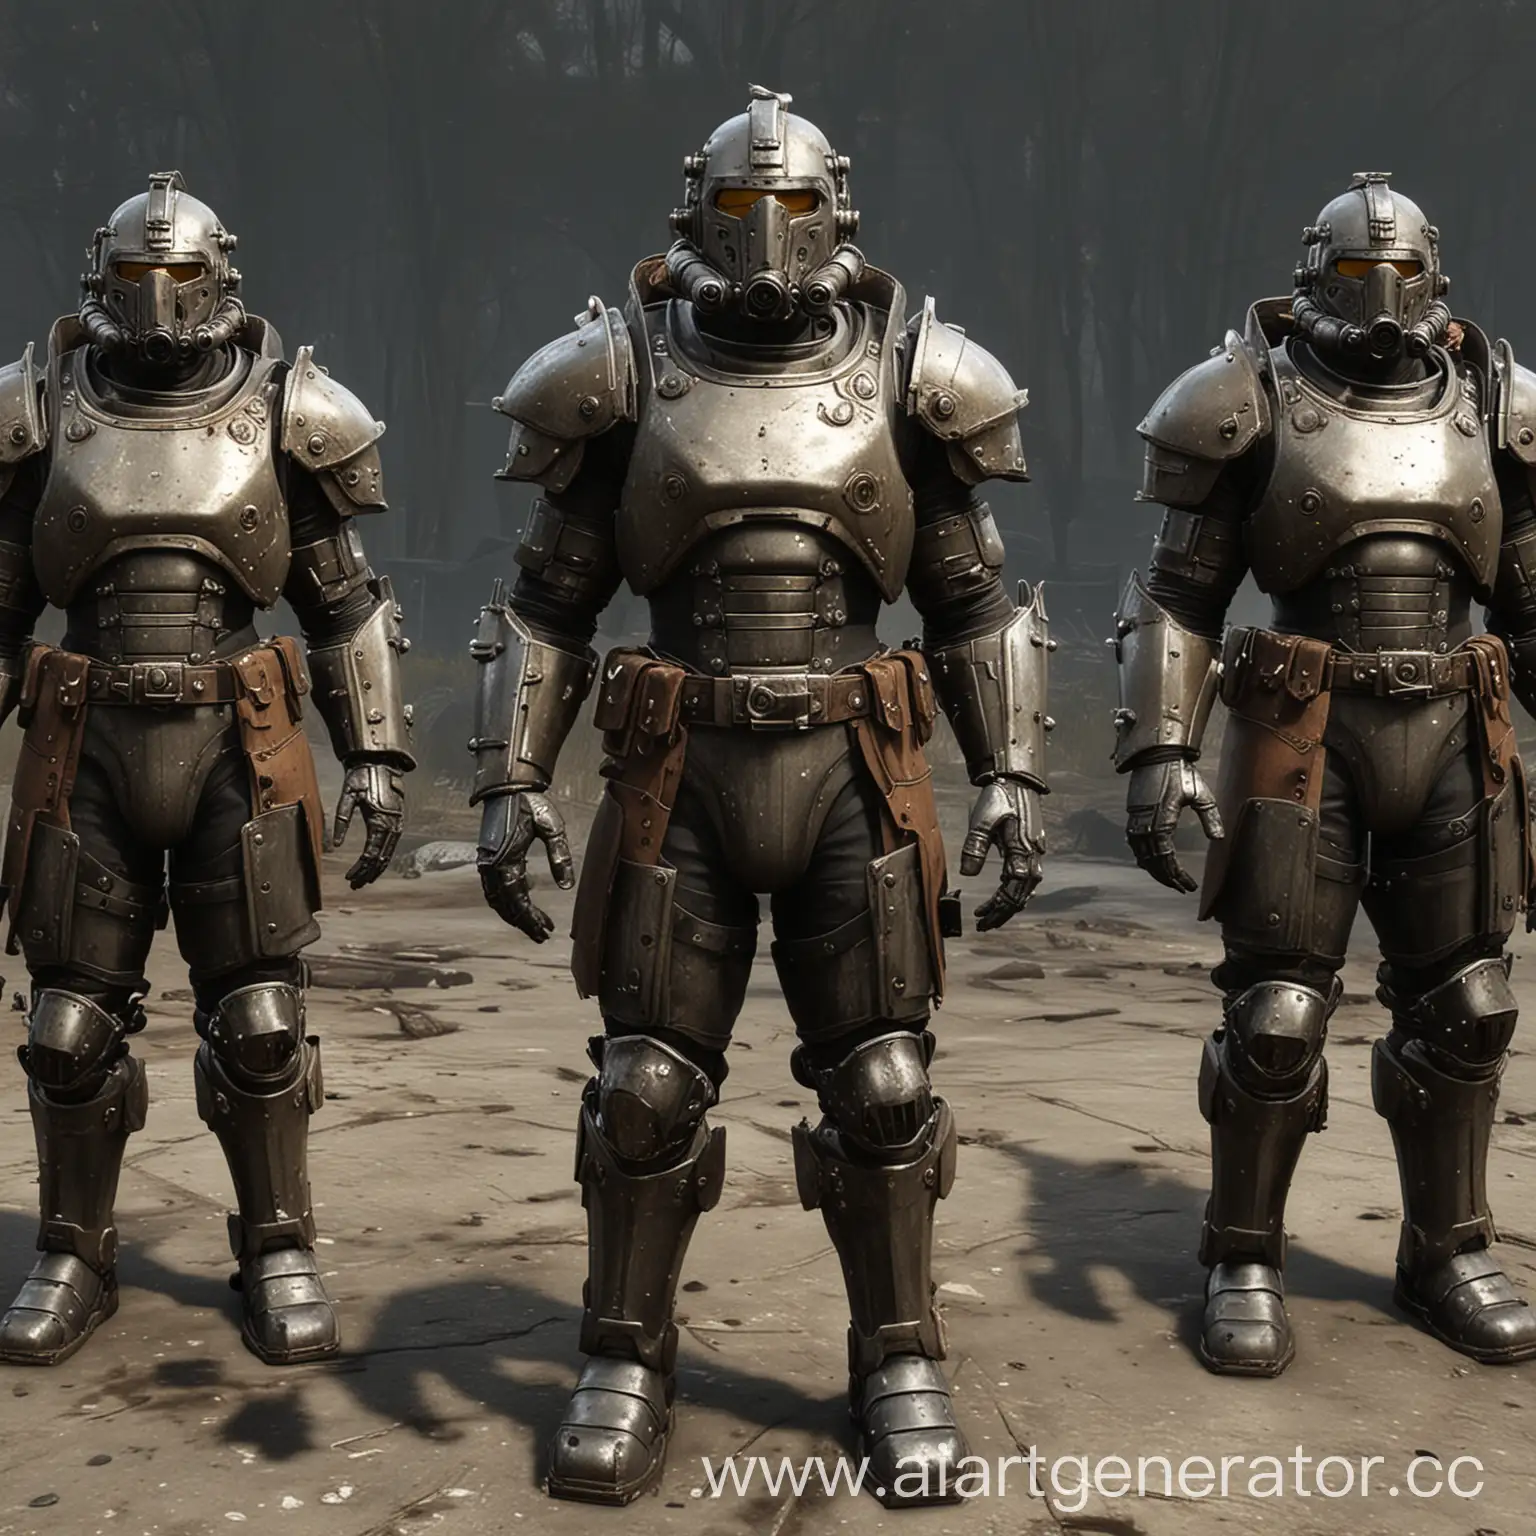 British-Armor-Inspired-by-Fallout-4-PostApocalyptic-Military-Gear